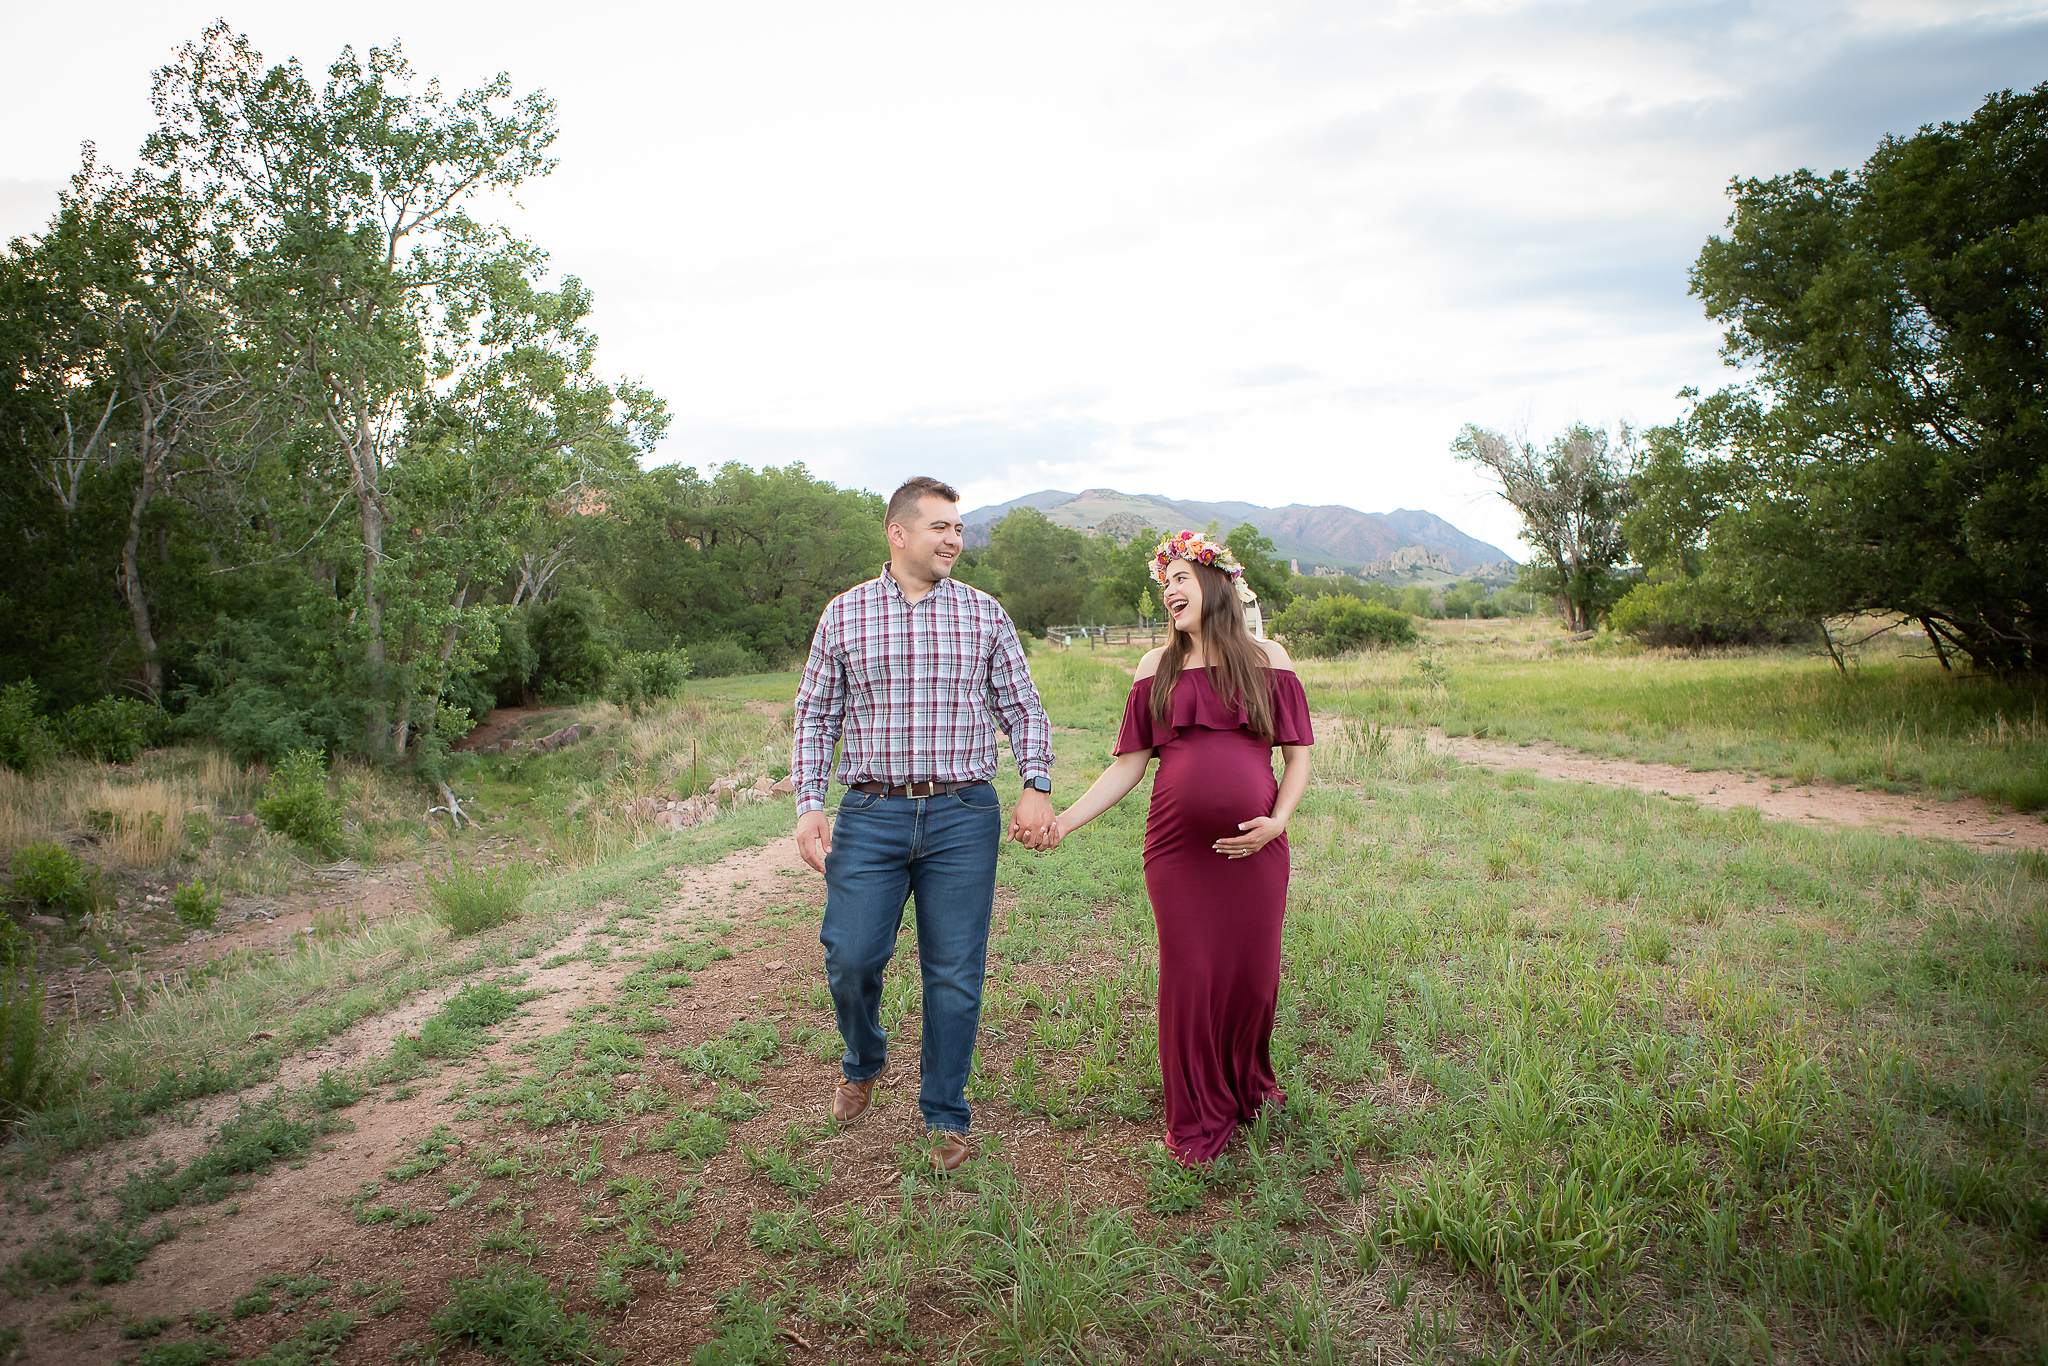 Colorado Springs Maternity Photography | The R Family on agkphotography.com